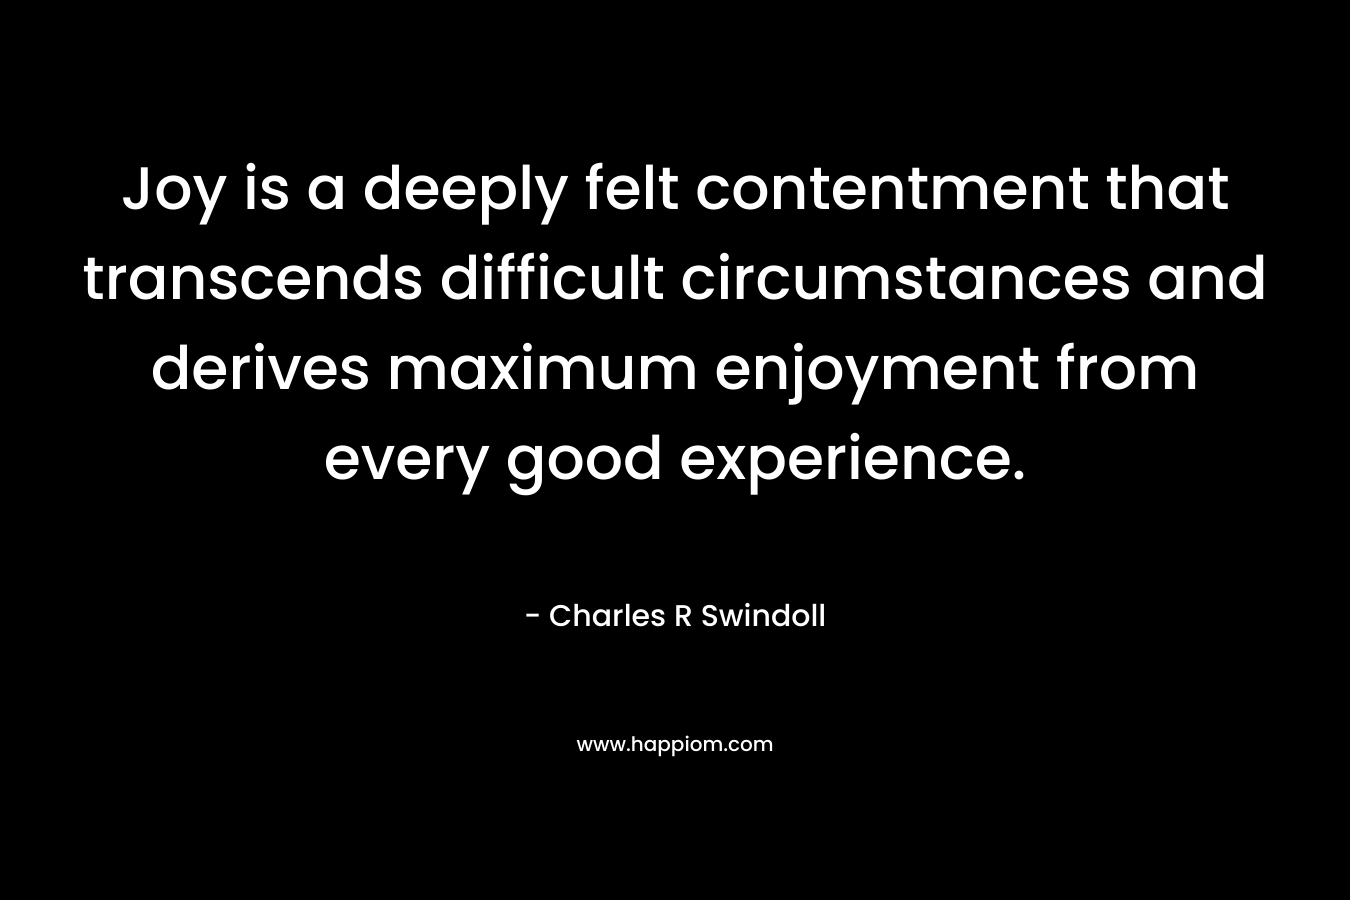 Joy is a deeply felt contentment that transcends difficult circumstances and derives maximum enjoyment from every good experience. – Charles R Swindoll